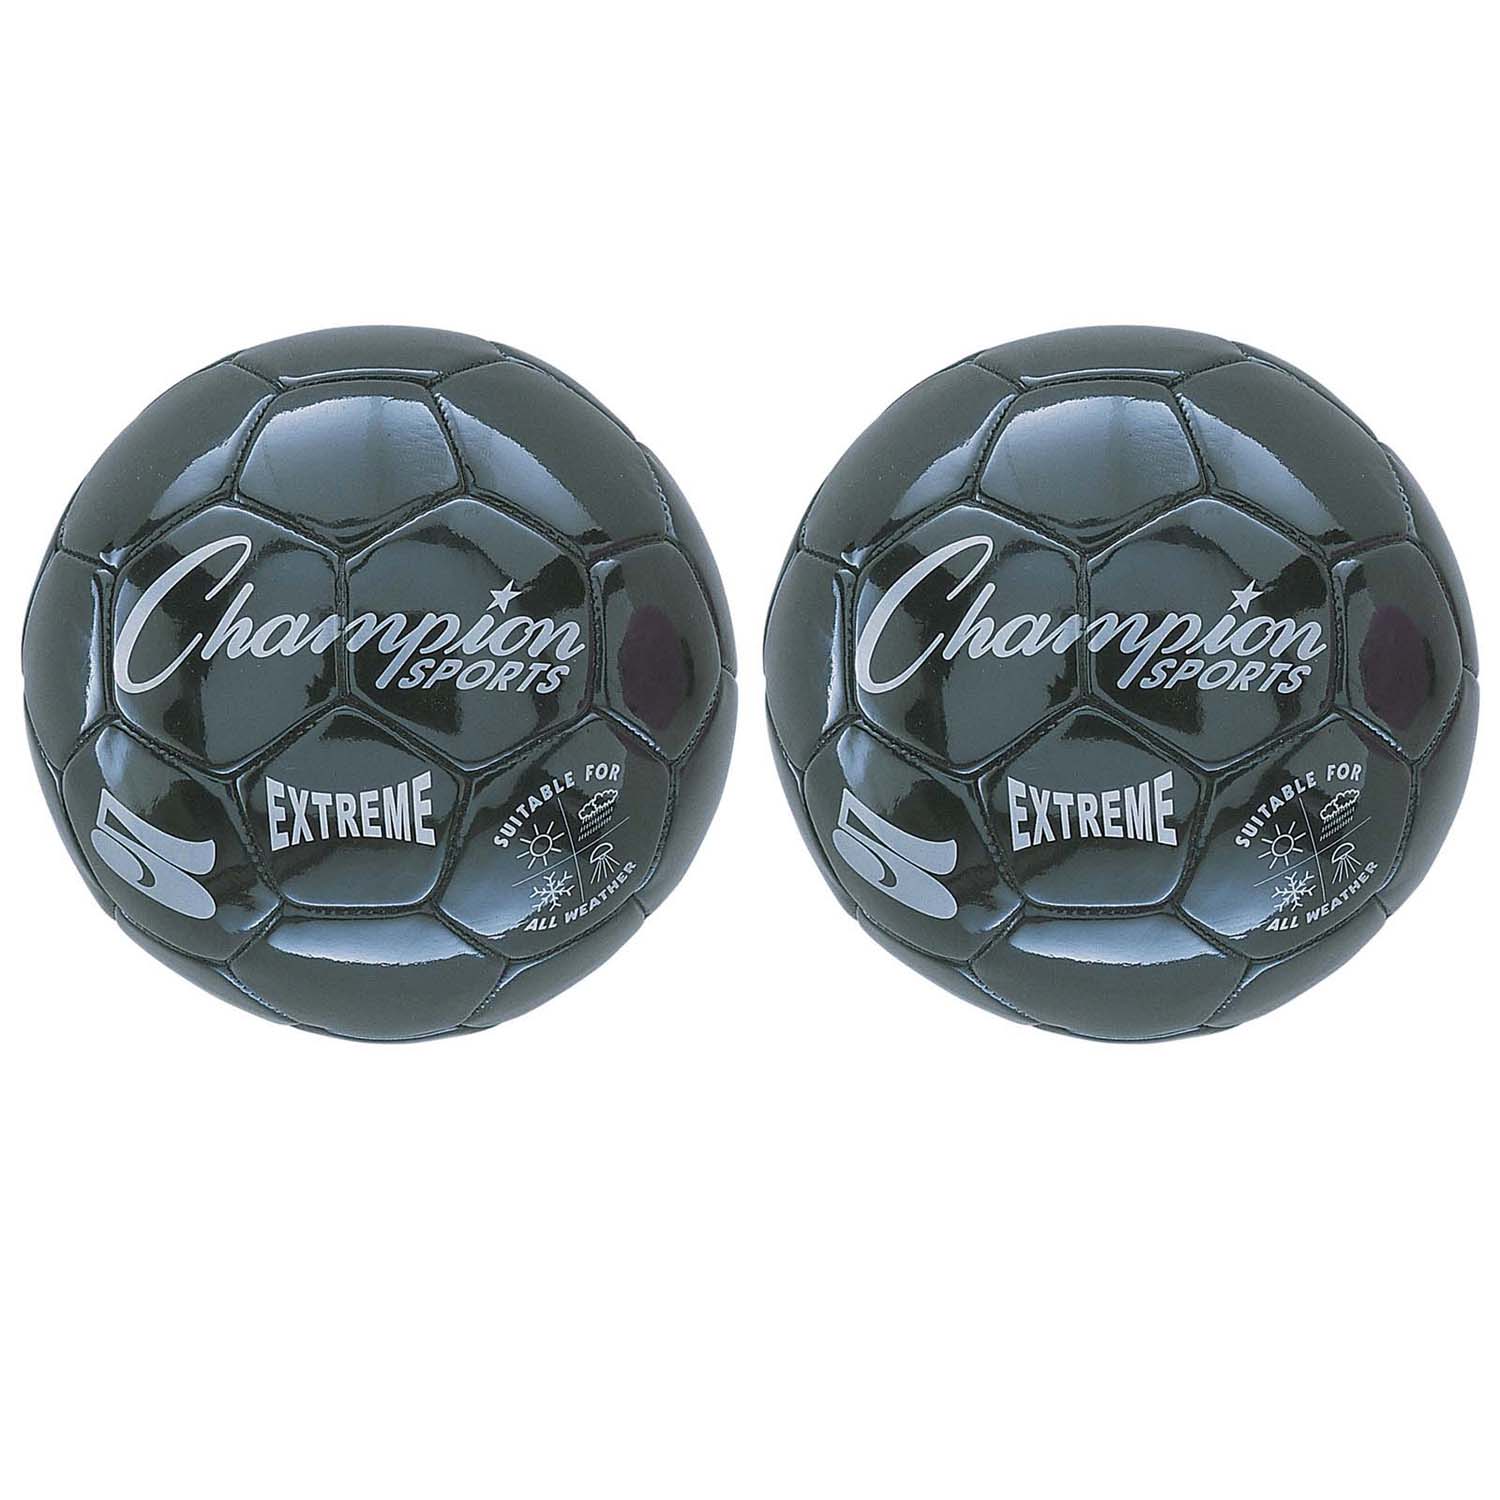 Extreme Soccer Ball, Size 5, Black, Pack of 2